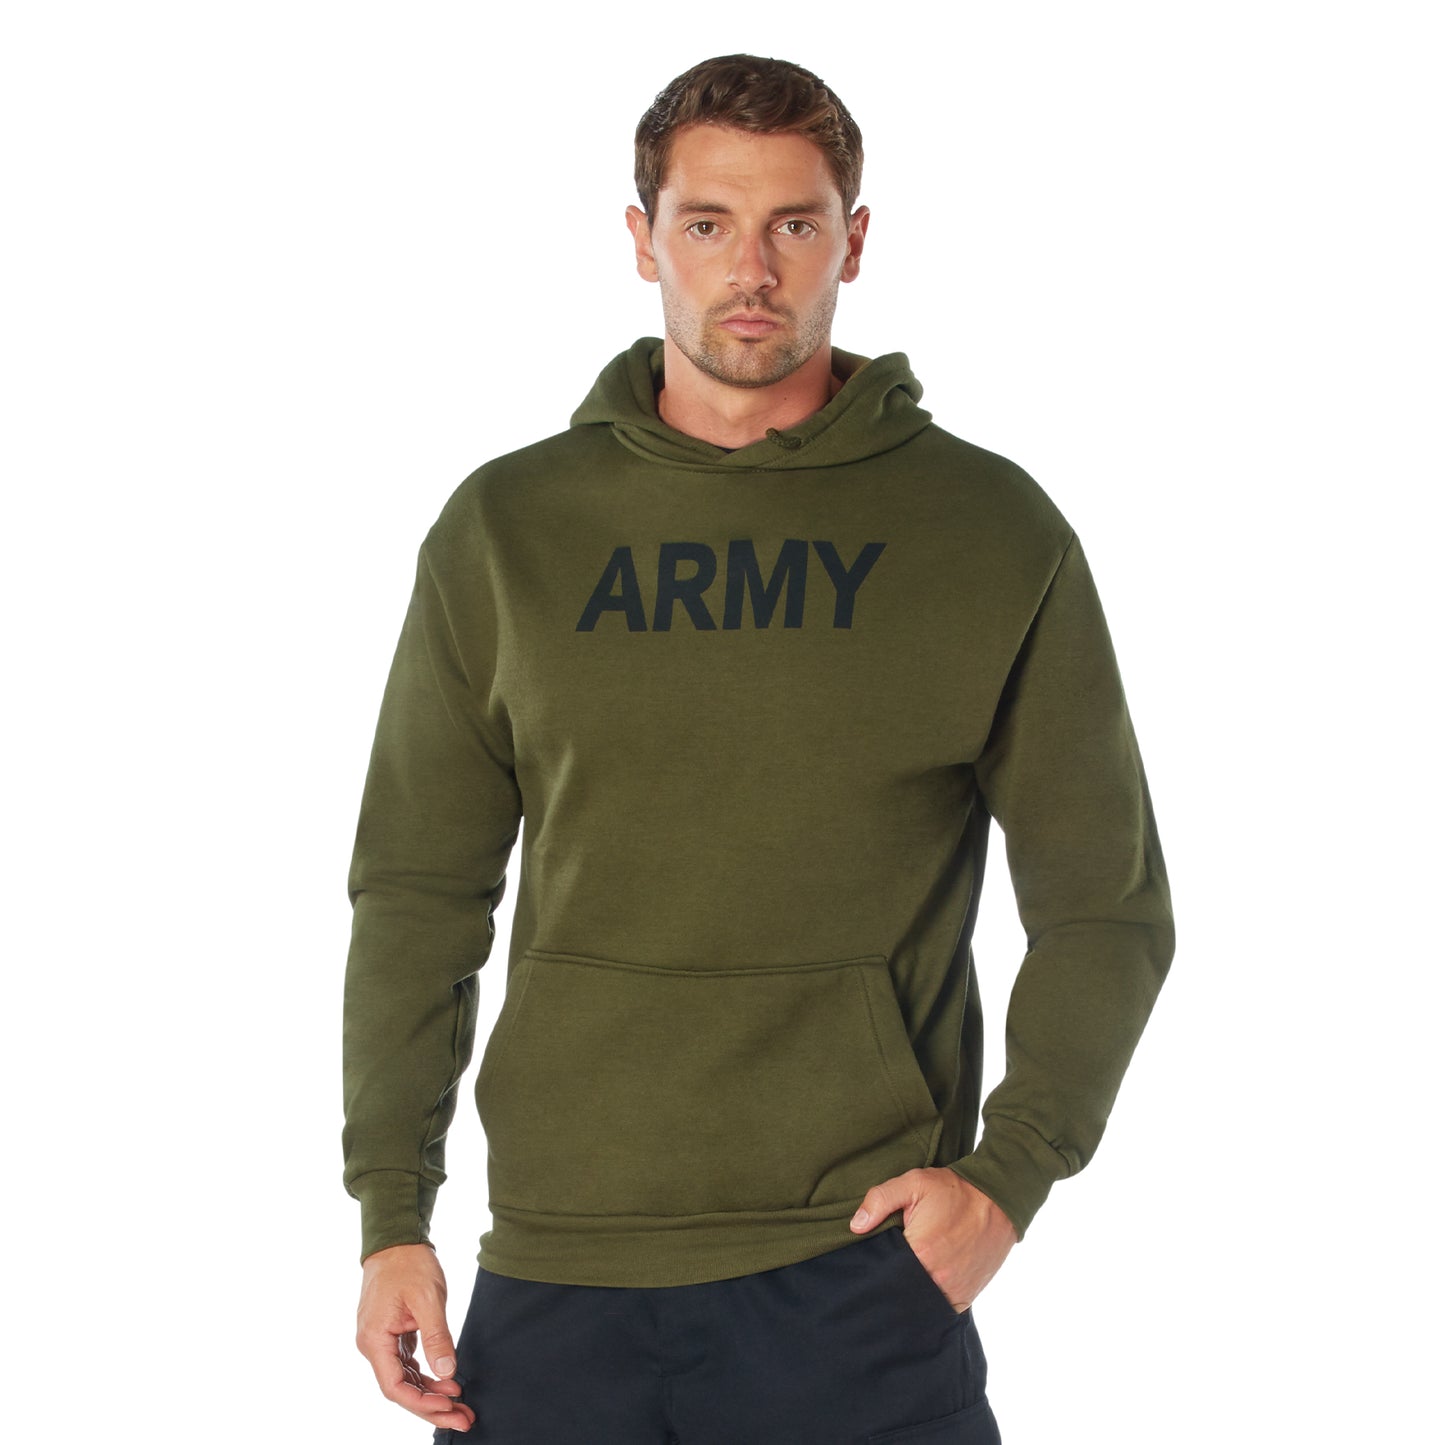 Rothco Army PT Pullover Hooded Sweatshirt - Olive Drab